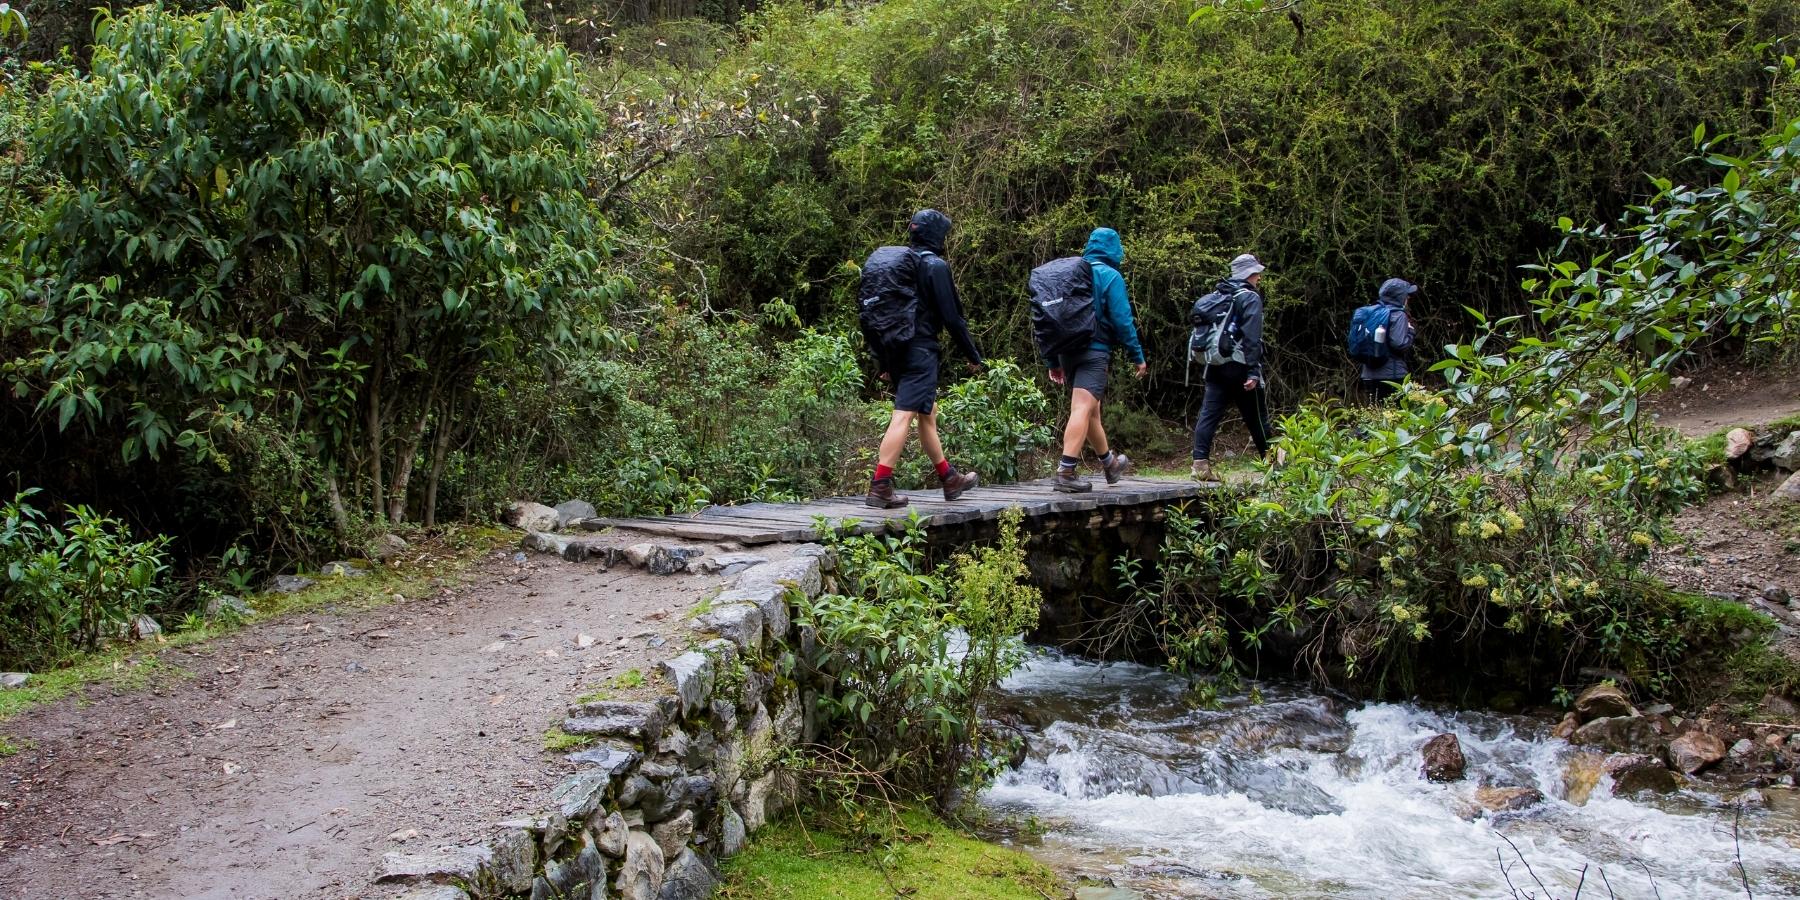 HOW MUCH DOES THE INCA TRAIL COST?